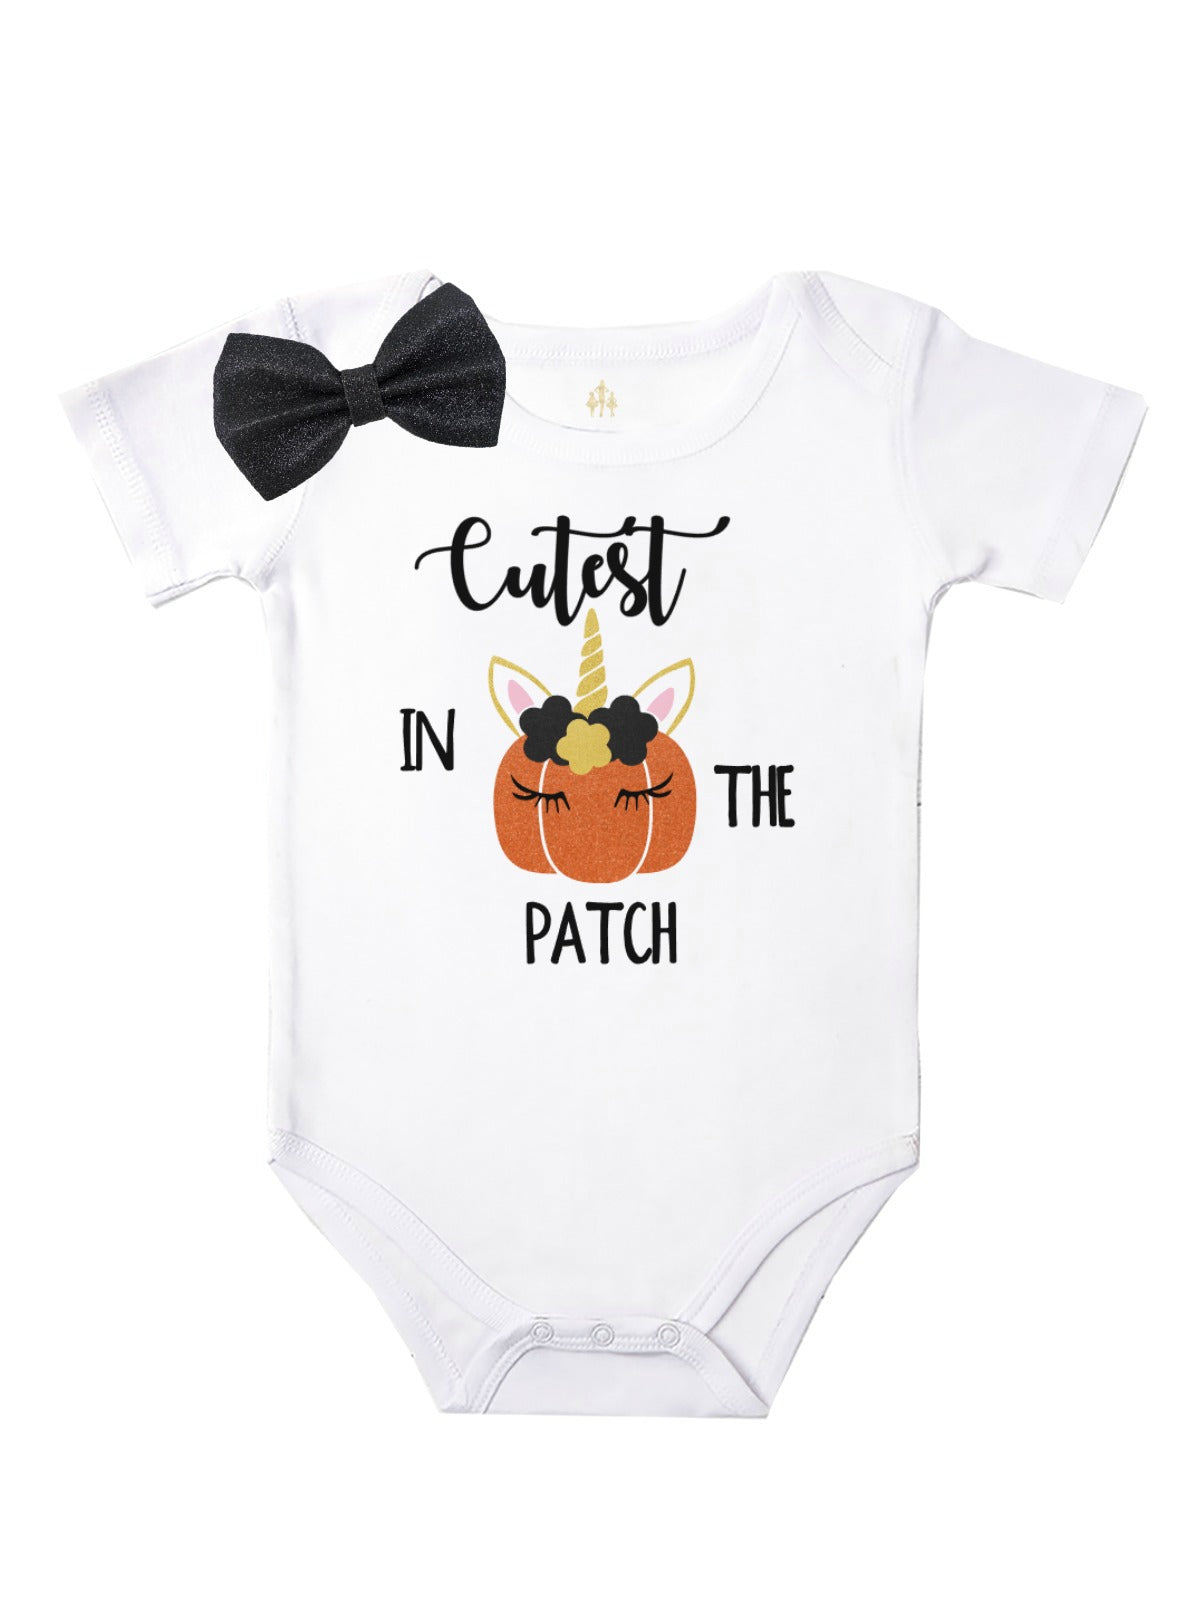 Cutest in the patch baby girl bodysuit